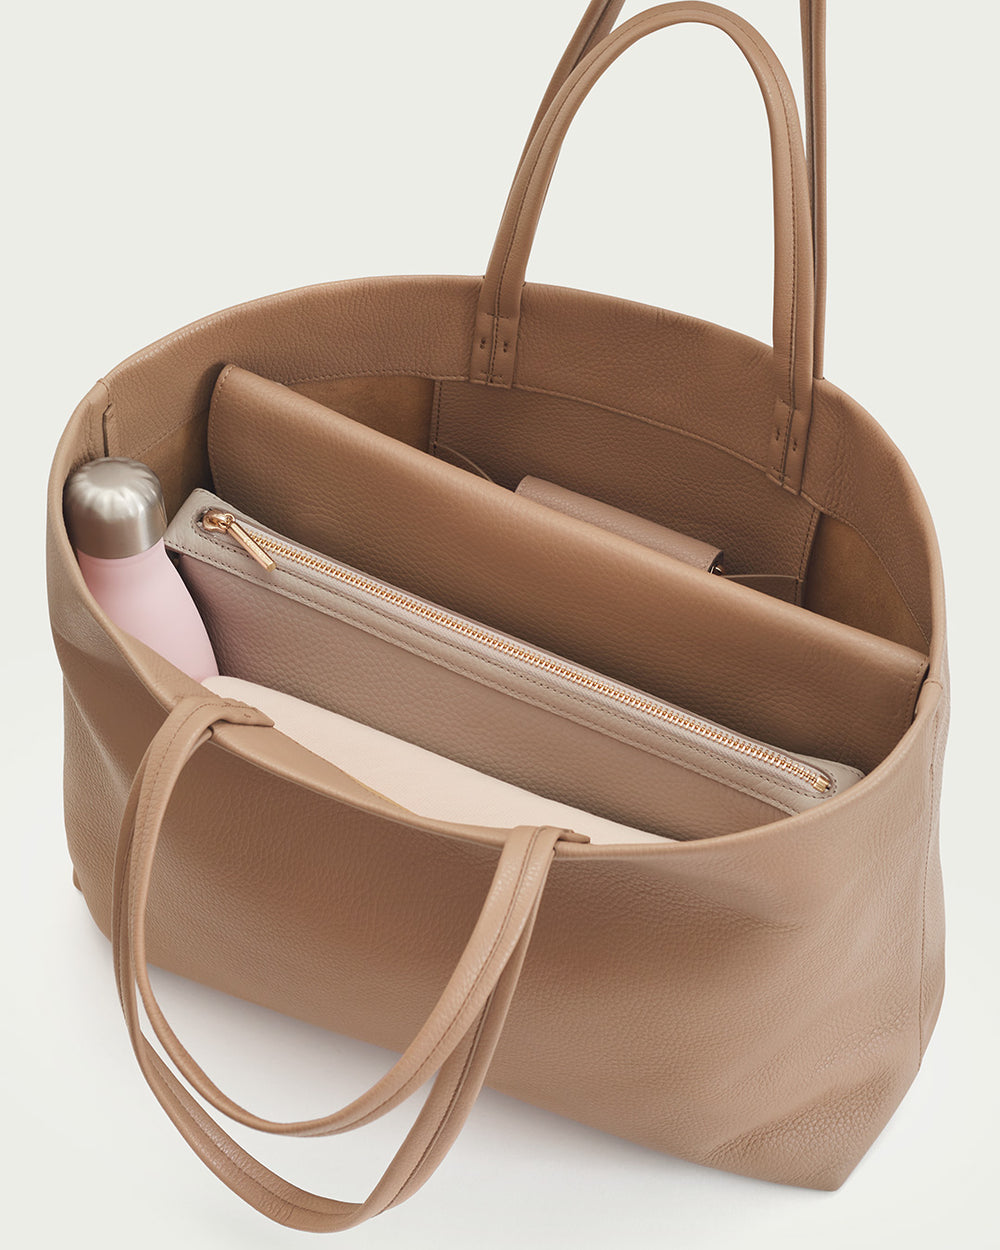 Open handbag showing internal compartments with items inside.